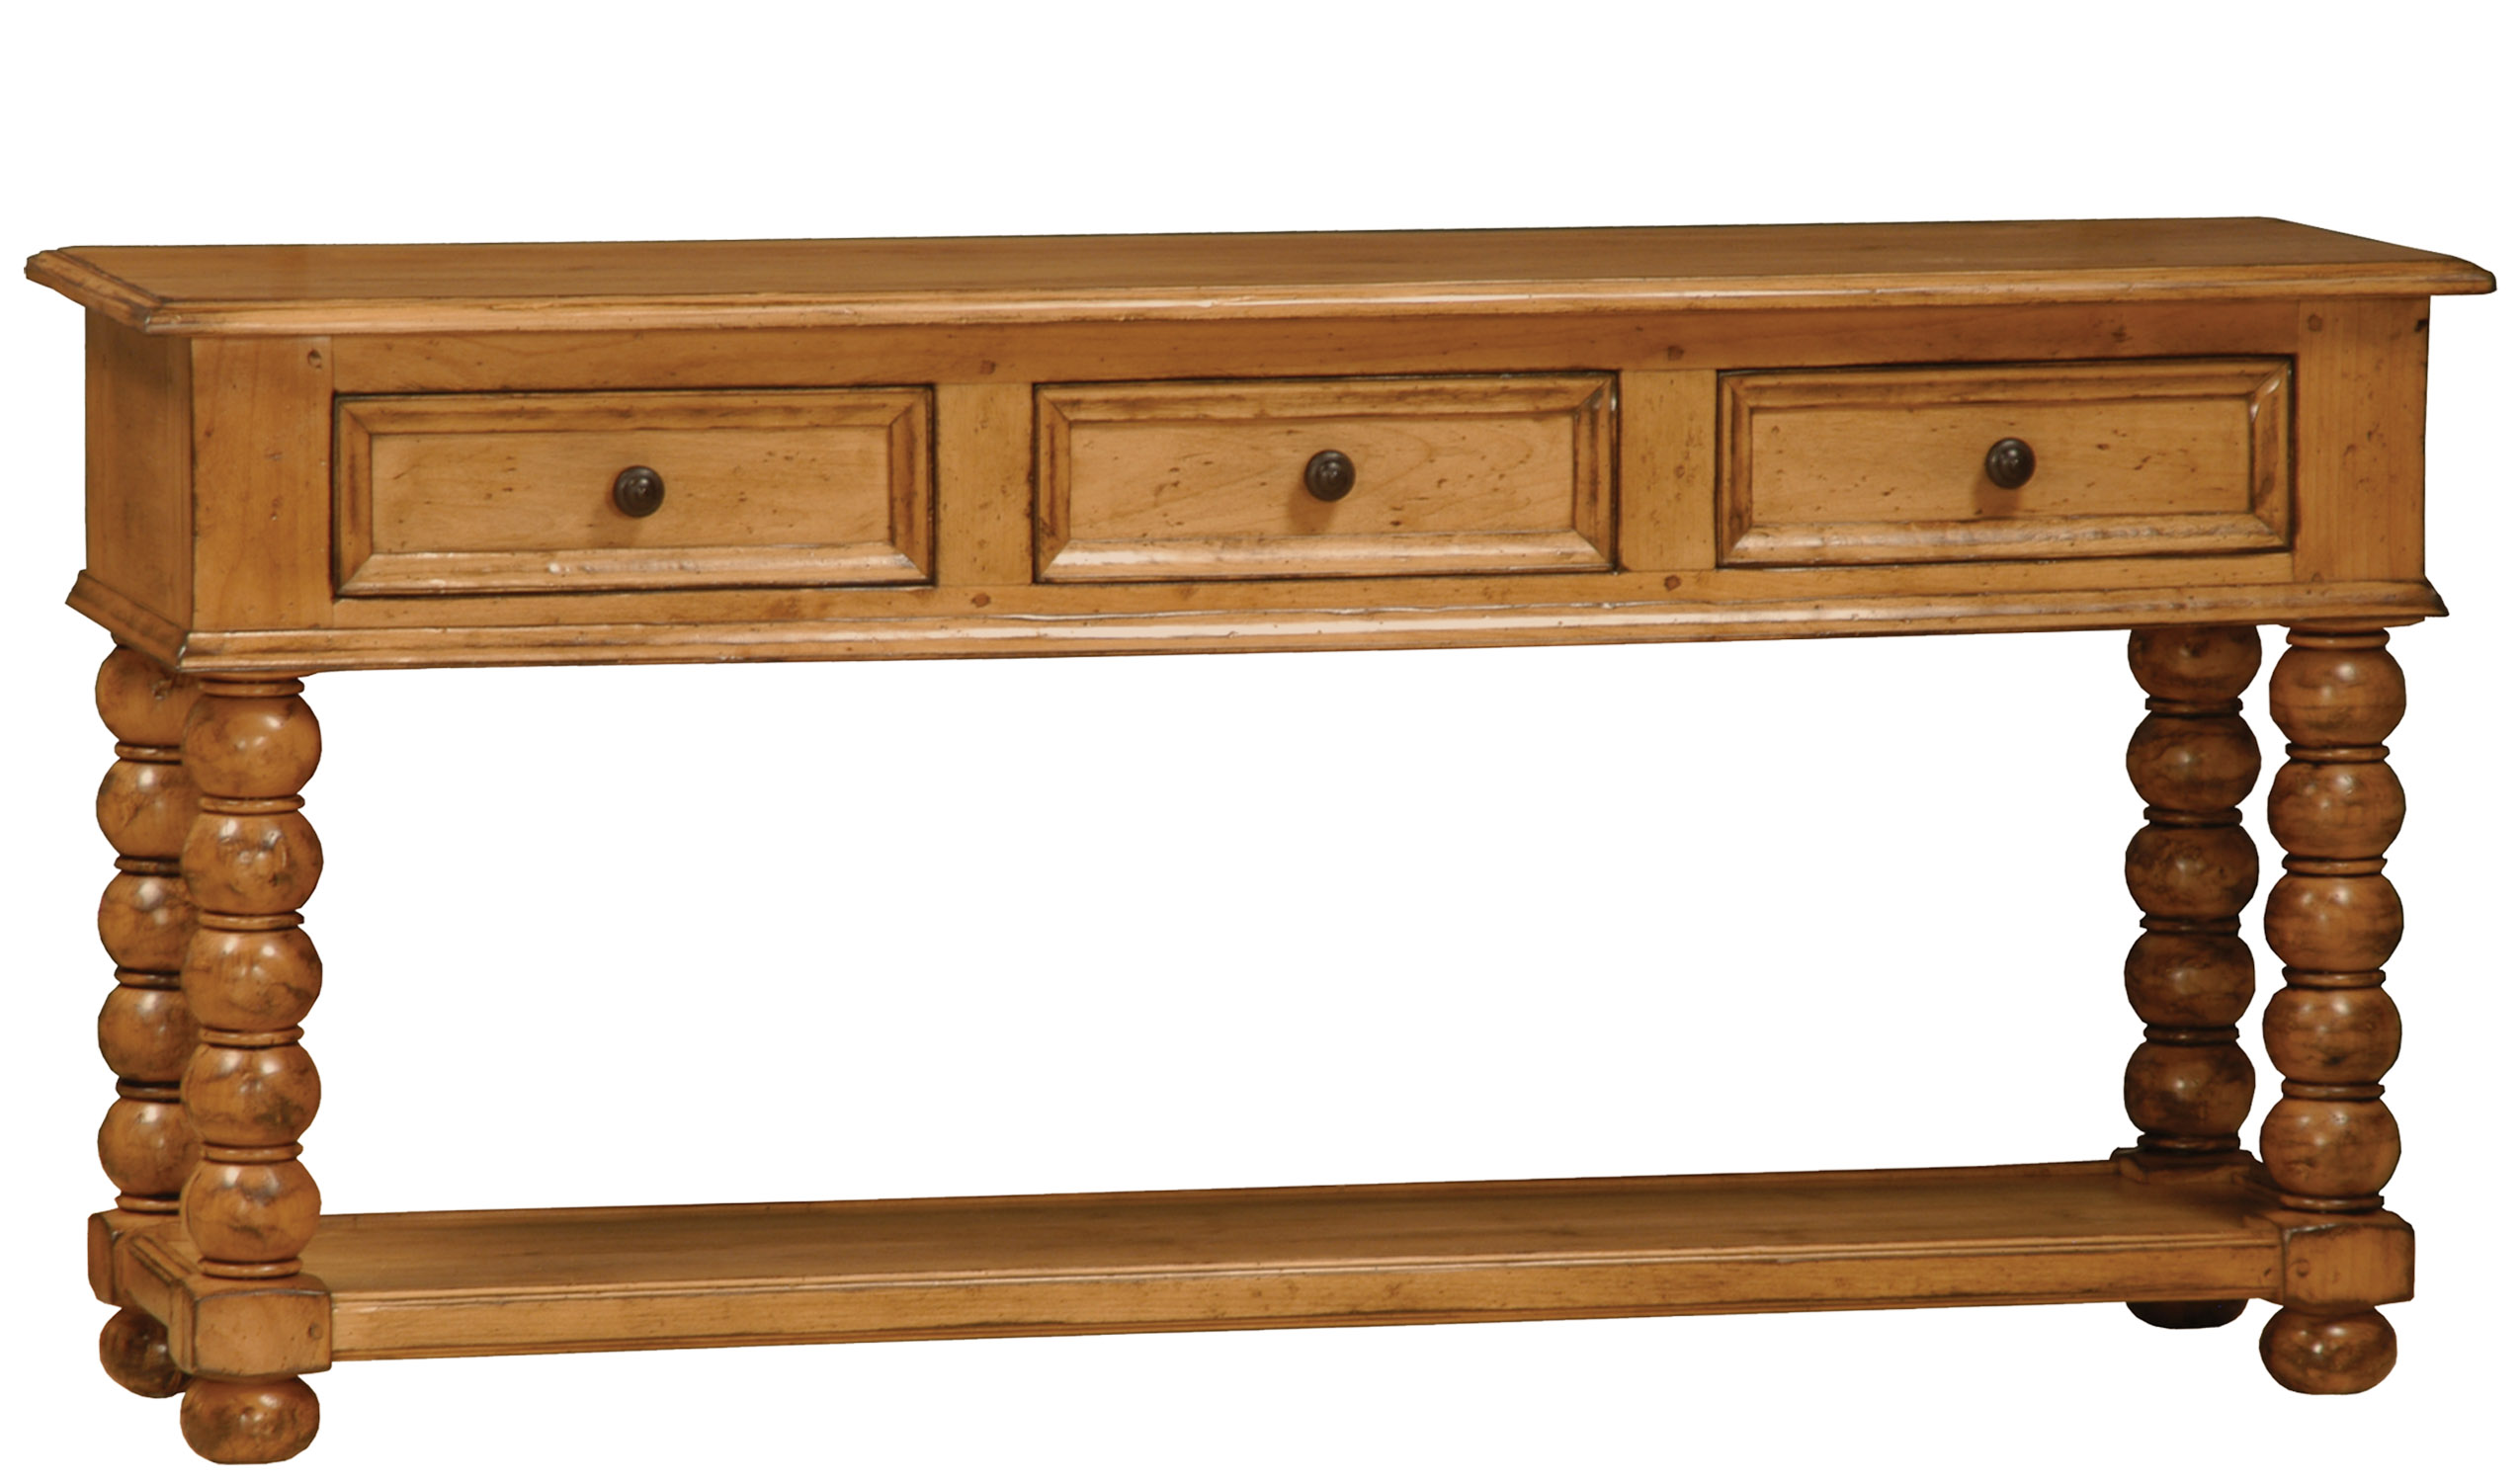 Halstead turned leg console sofa table with drawers and shelf by Woodland furniture in Idaho Falls